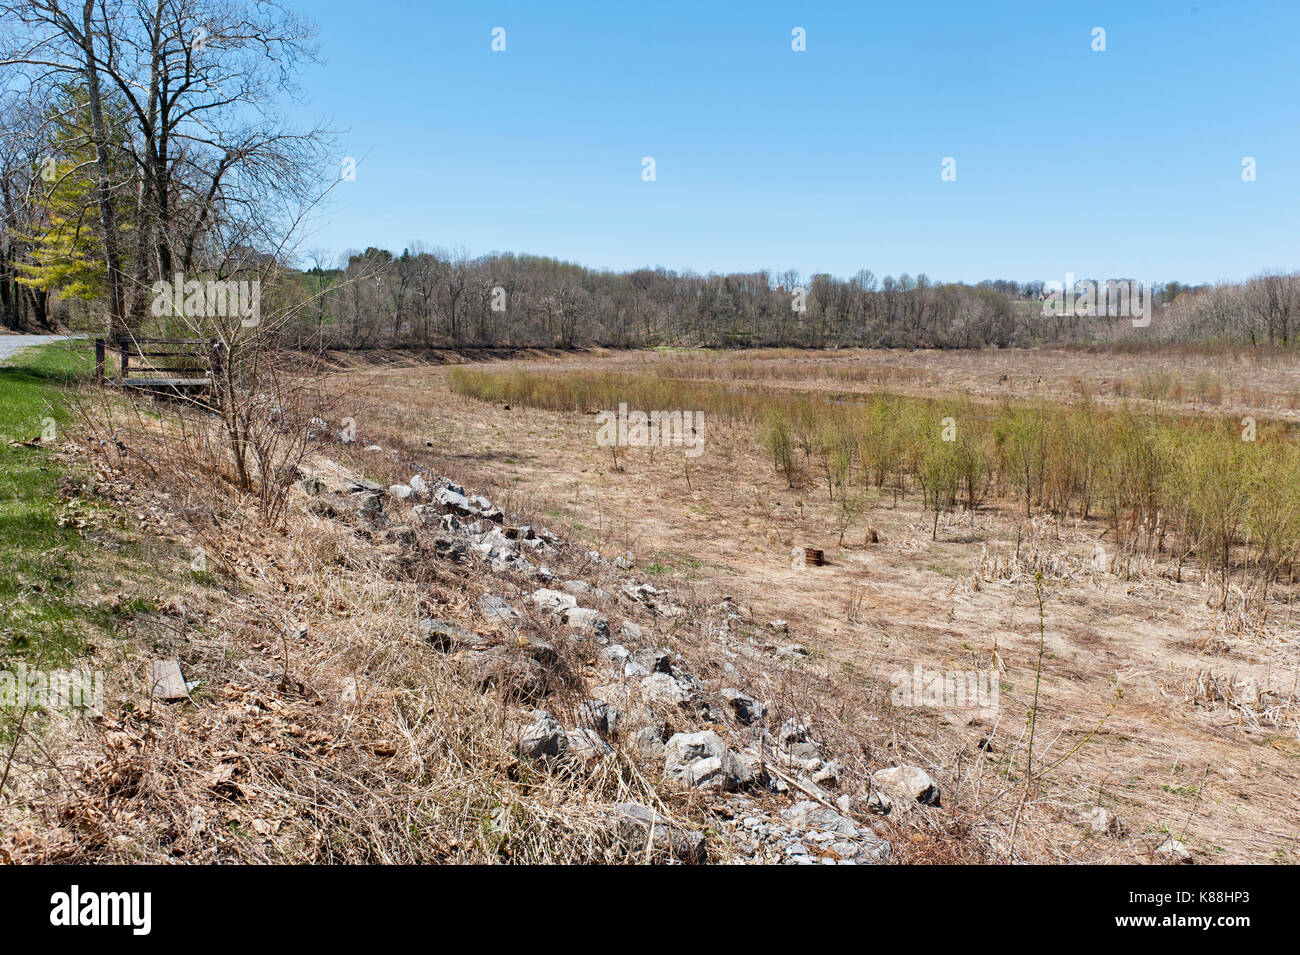 VIEW WEEDS GROWING IN THE LOWER END OF SPEEDWELL FORGE LAKE'S DRY LAKE BED, LITITZ PENNSYLVANIA Stock Photo